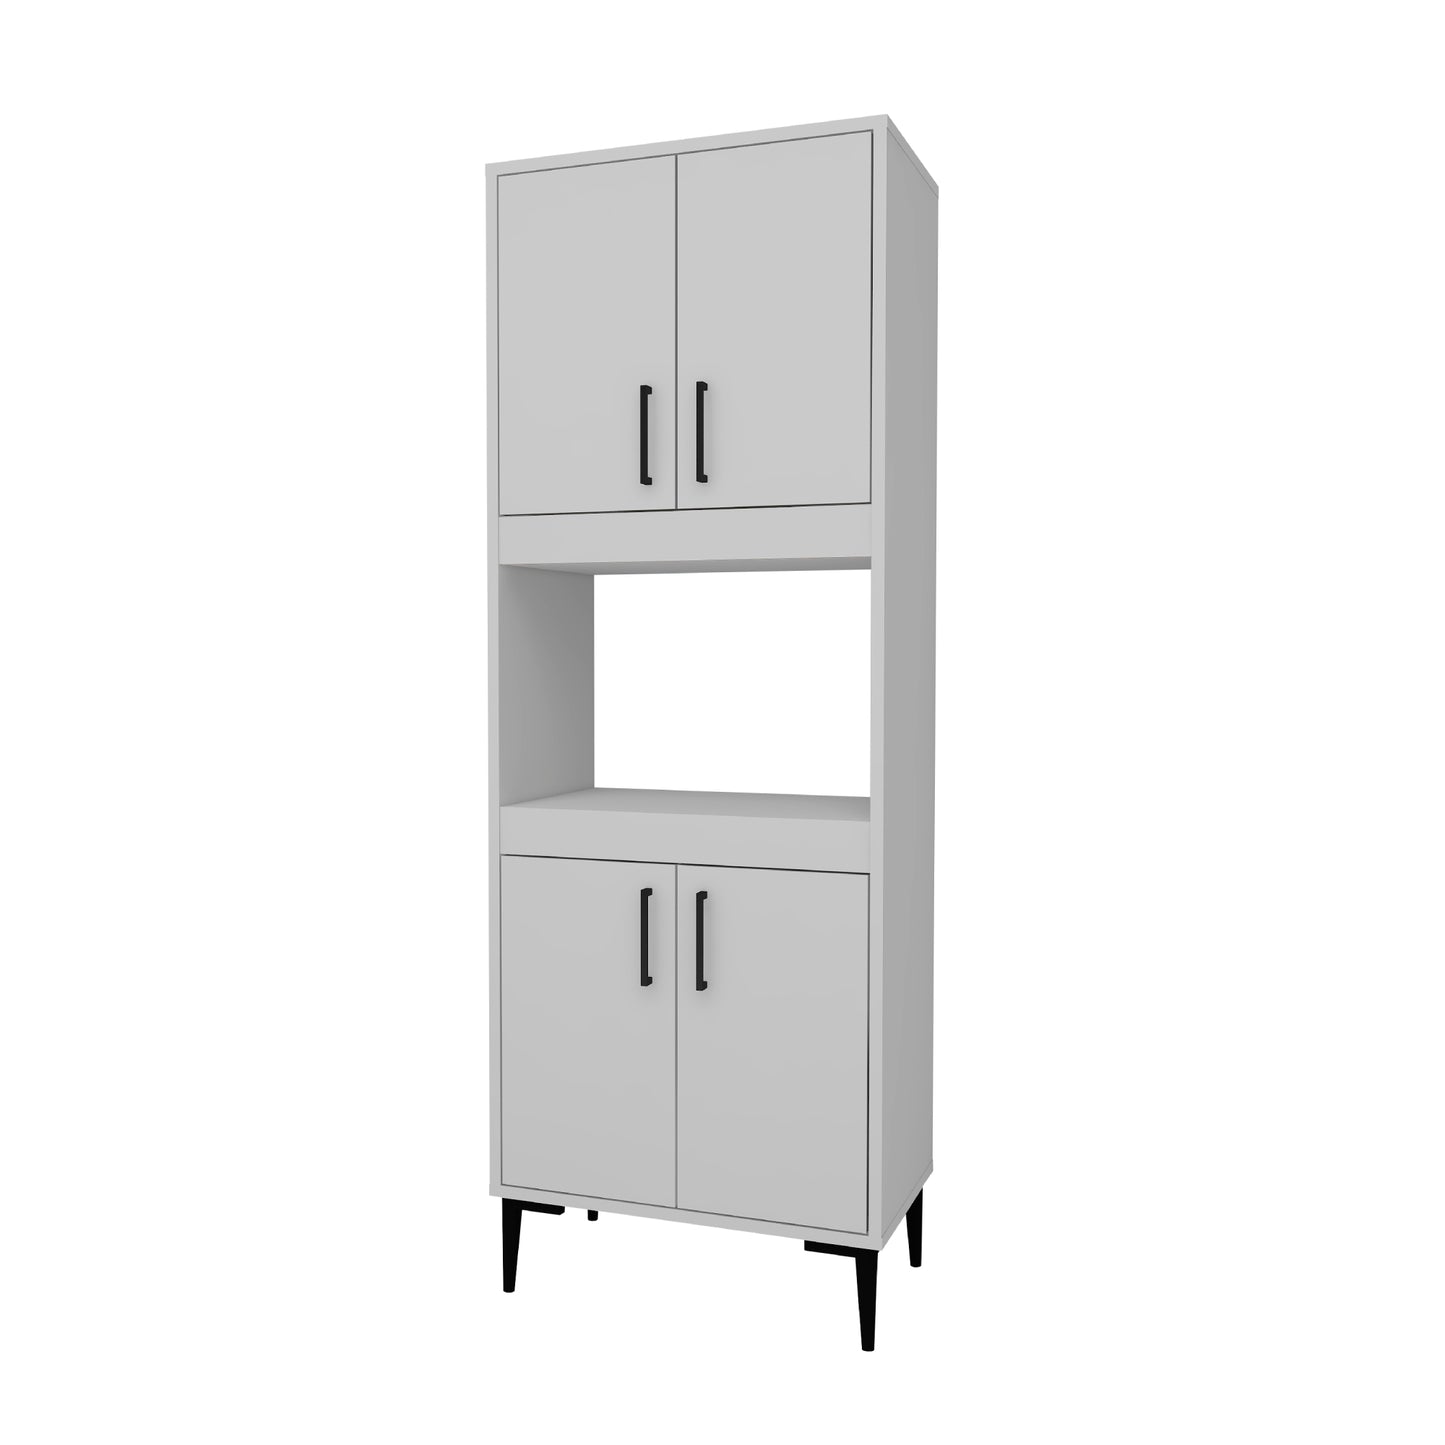 Aera Kitchen Cabinet with Shelves